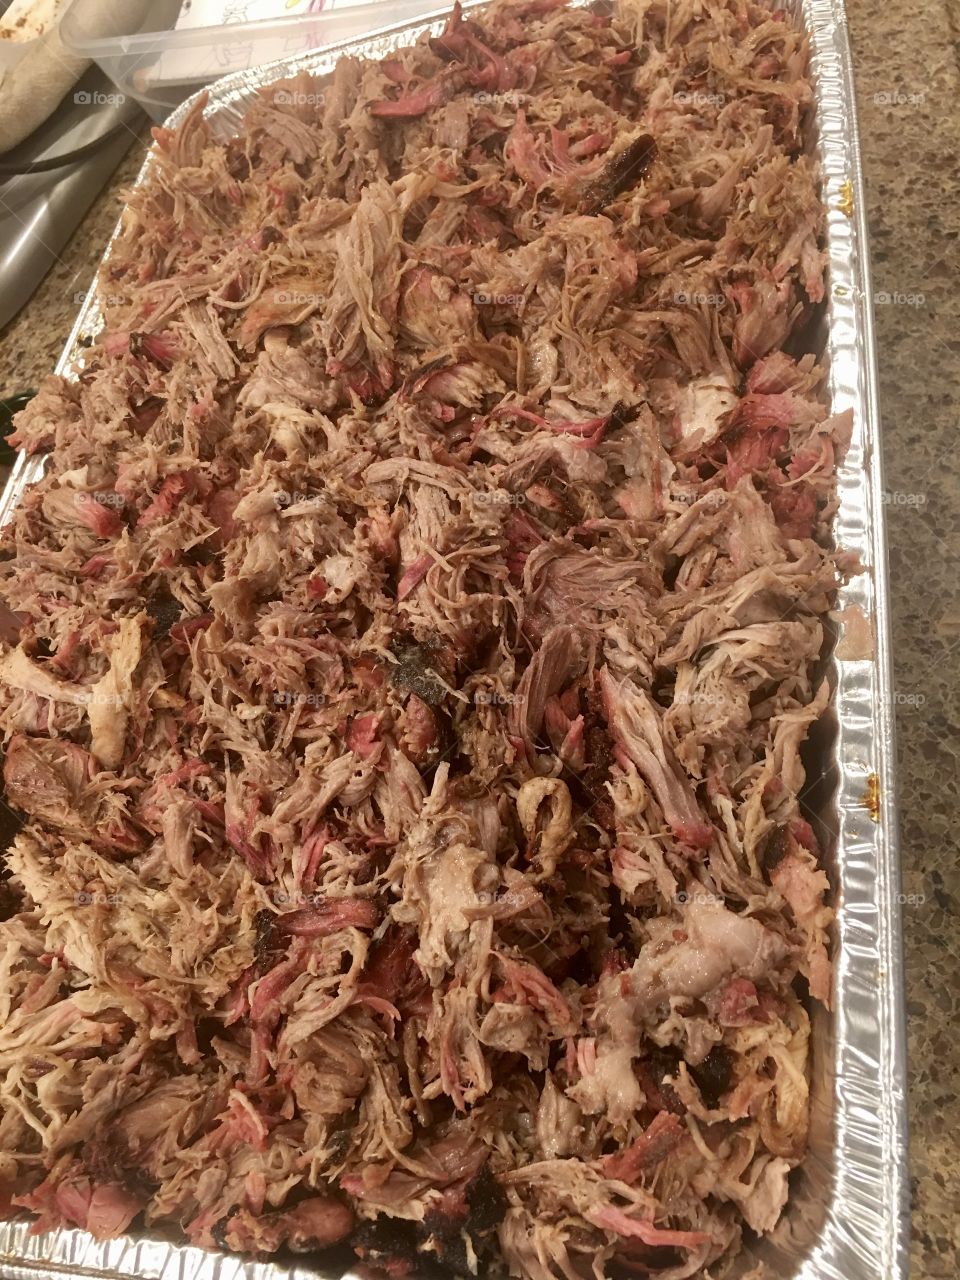 Pulled pork fresh off the smoker 